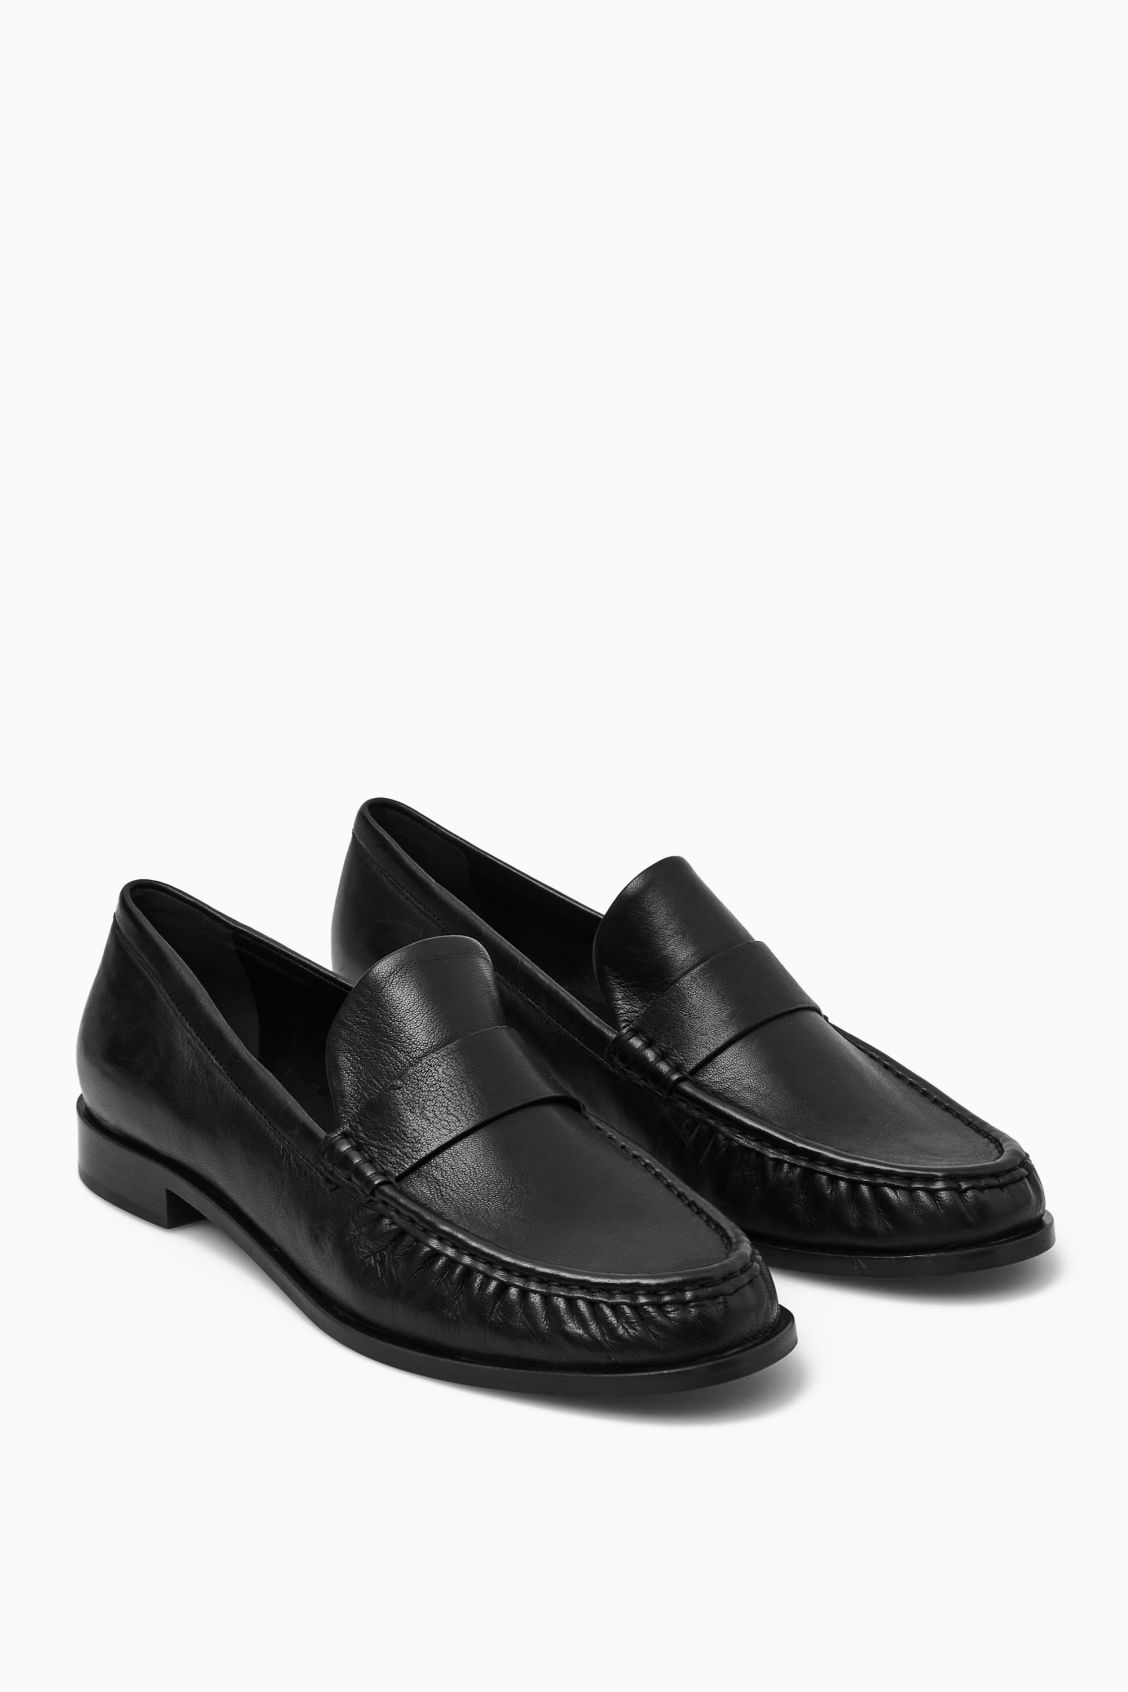 COS + Leather-essentially based mostly Loafers